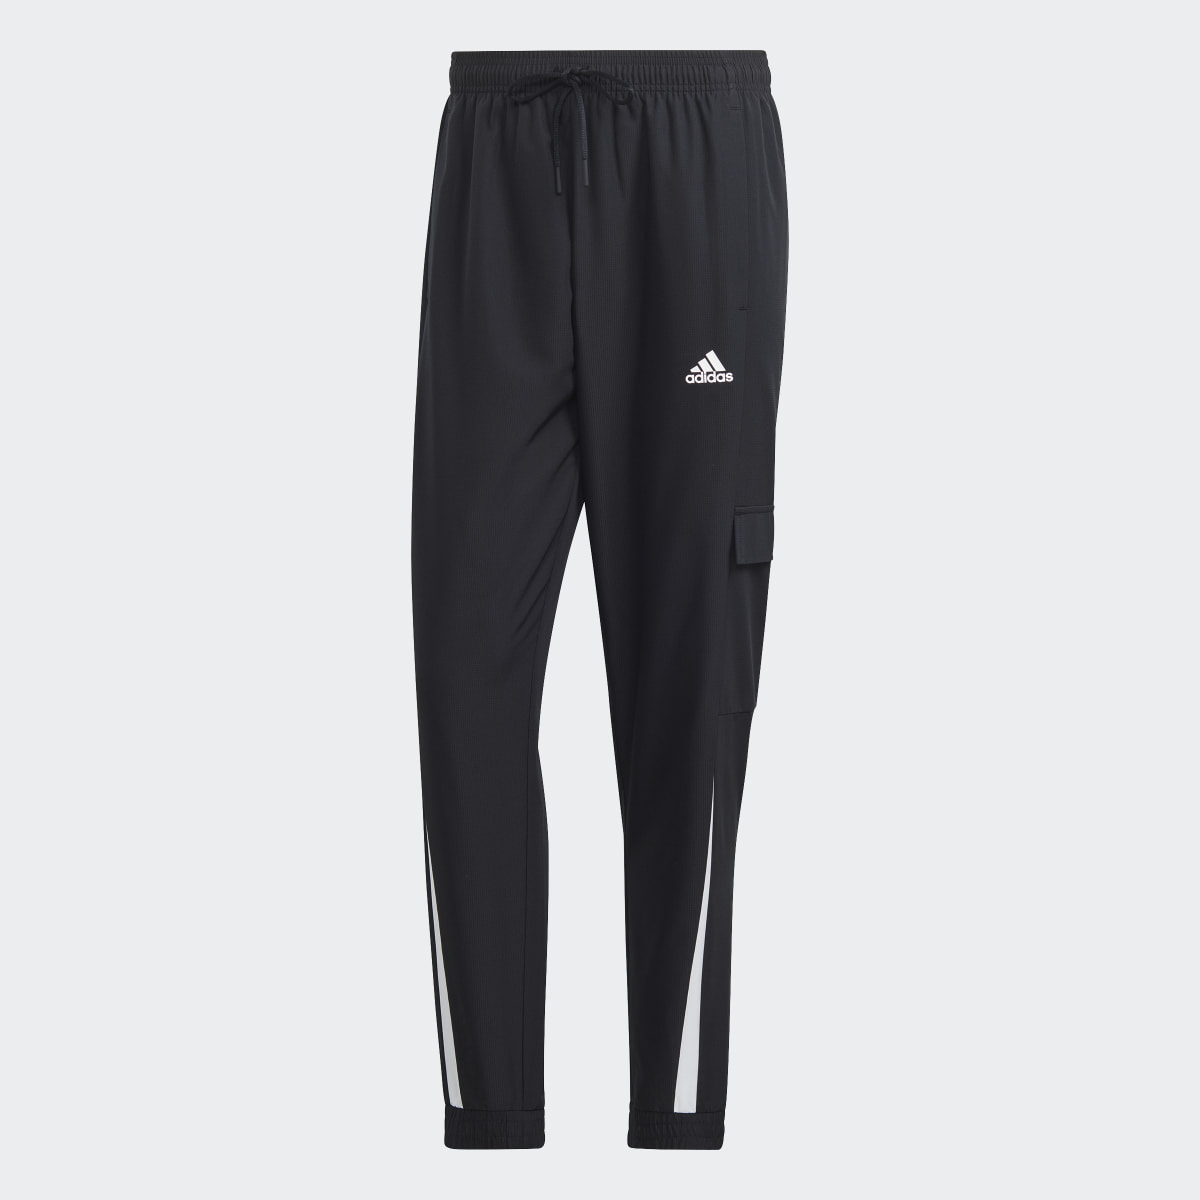 Adidas Sportswear Woven Non-Hooded Tracksuit. 7